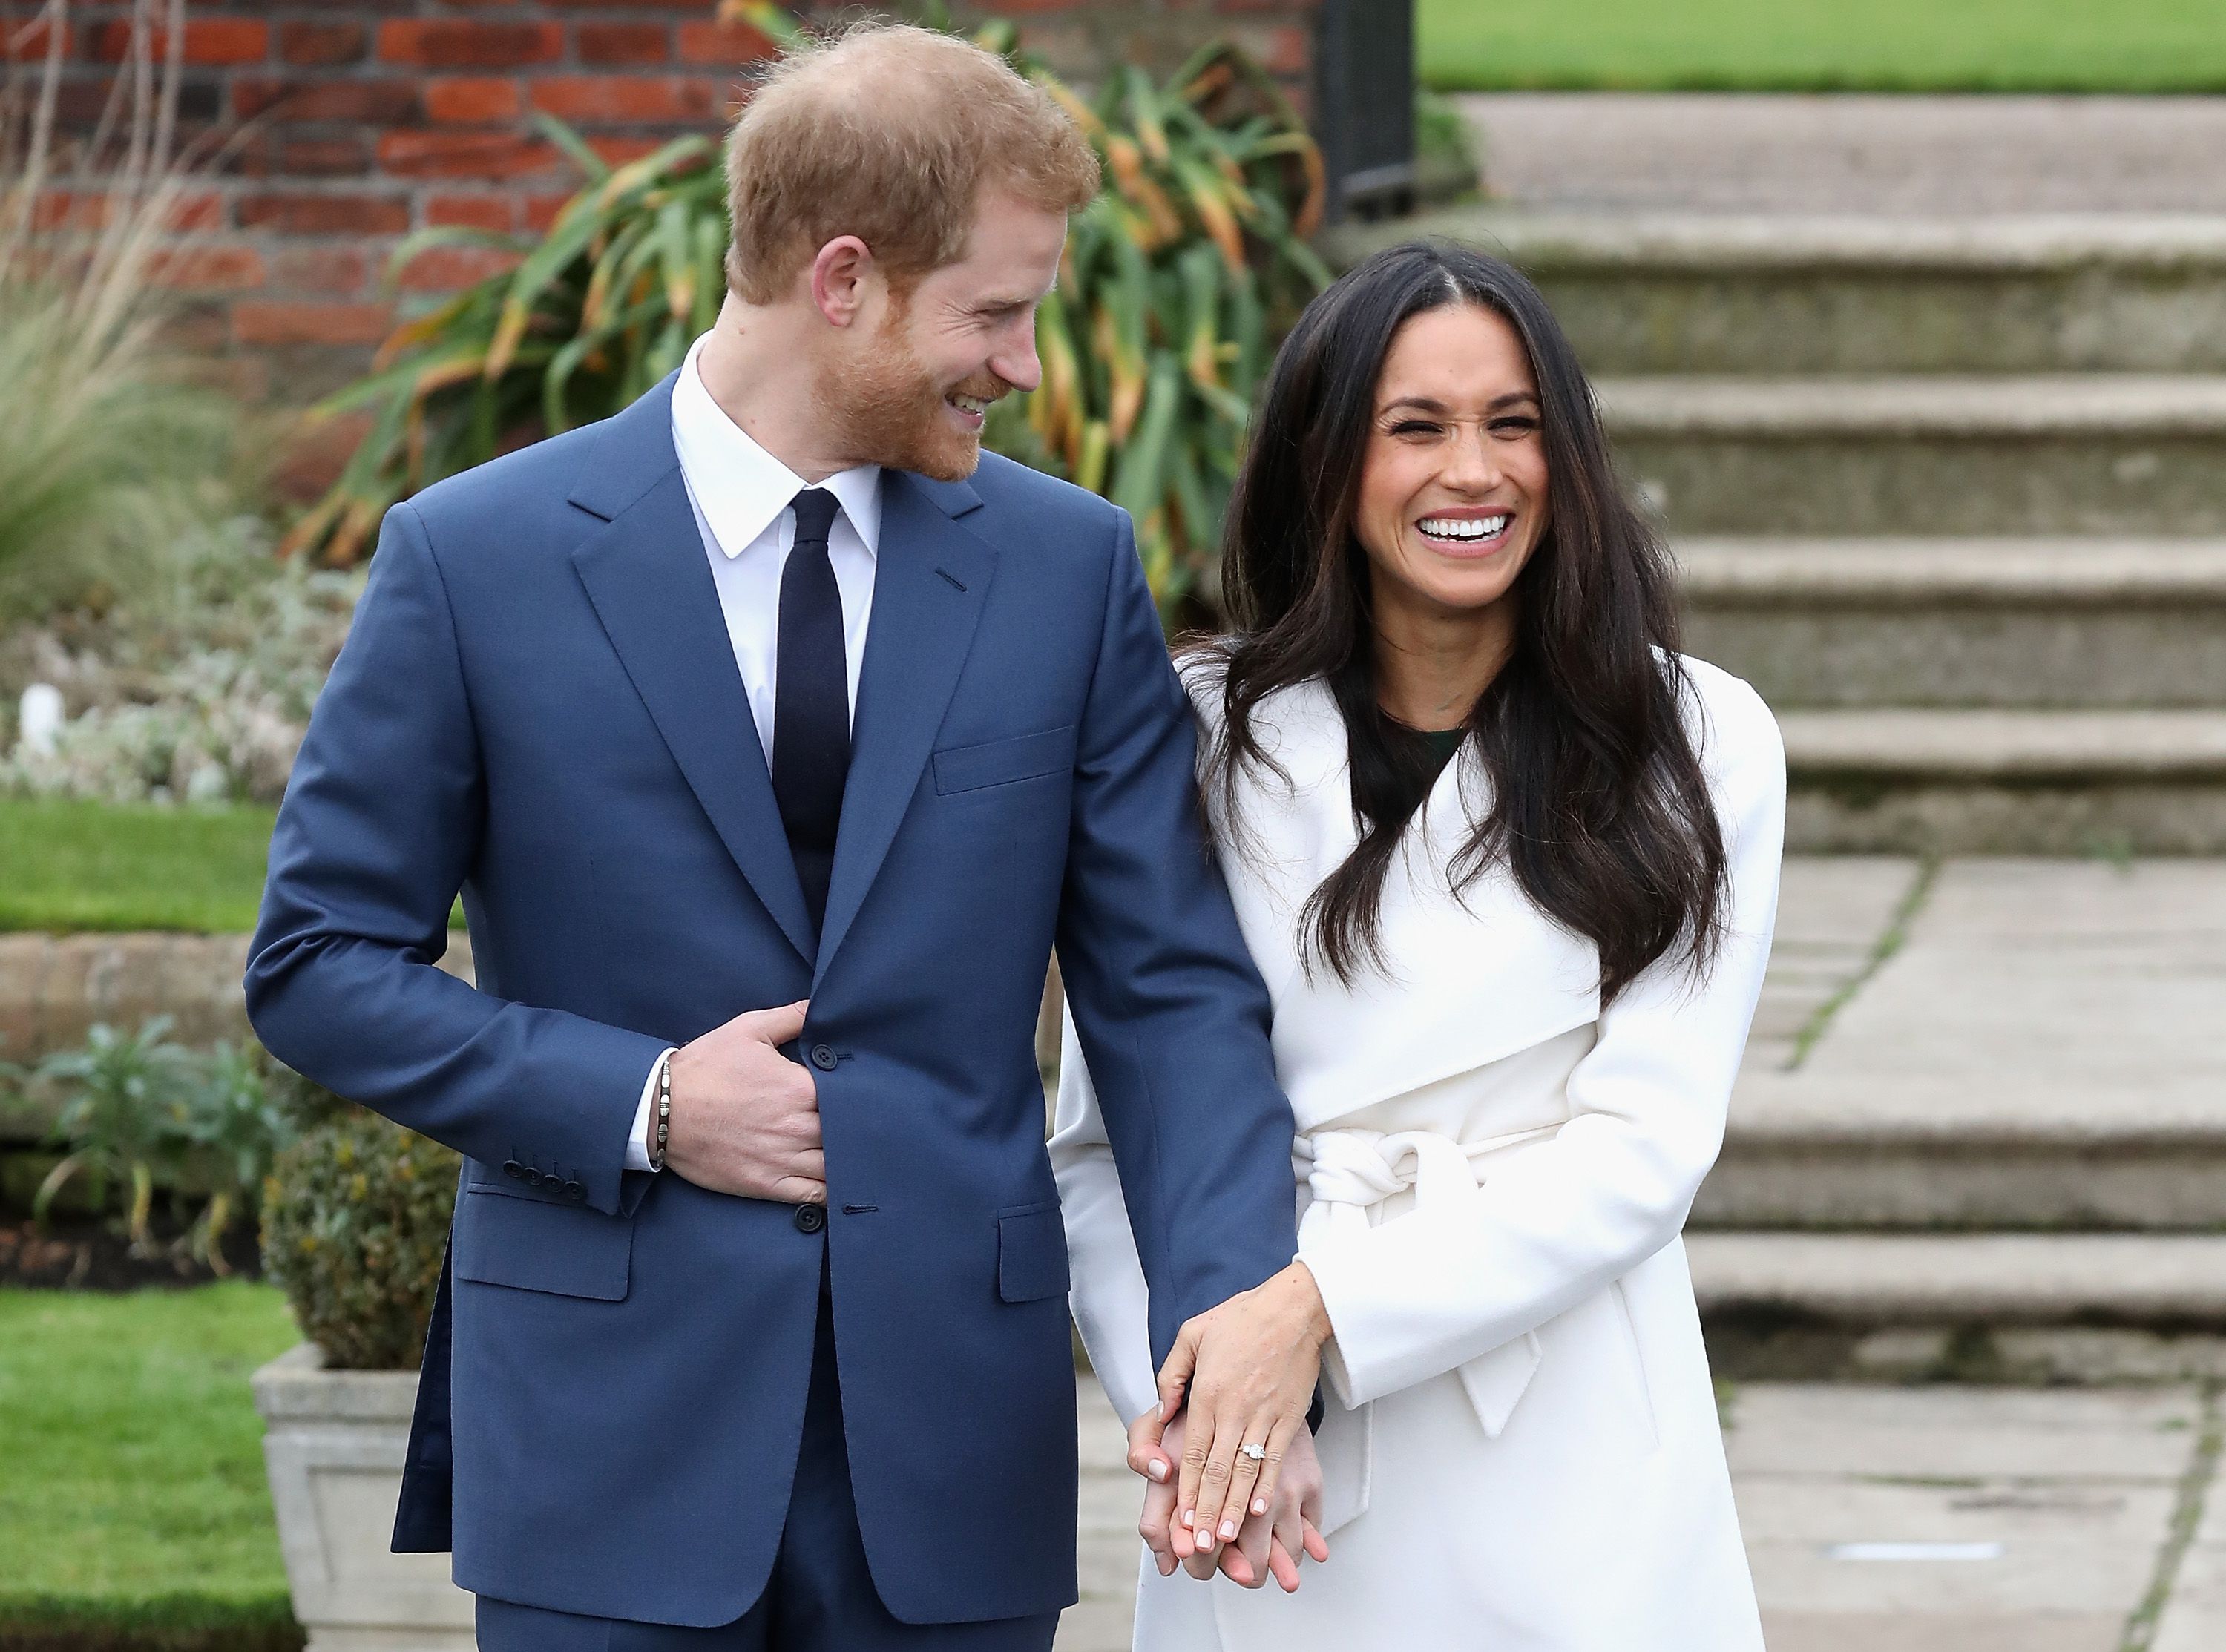 Royal Wedding: 9 shows to binge on Netflix before Harry and Meghan tie the knot